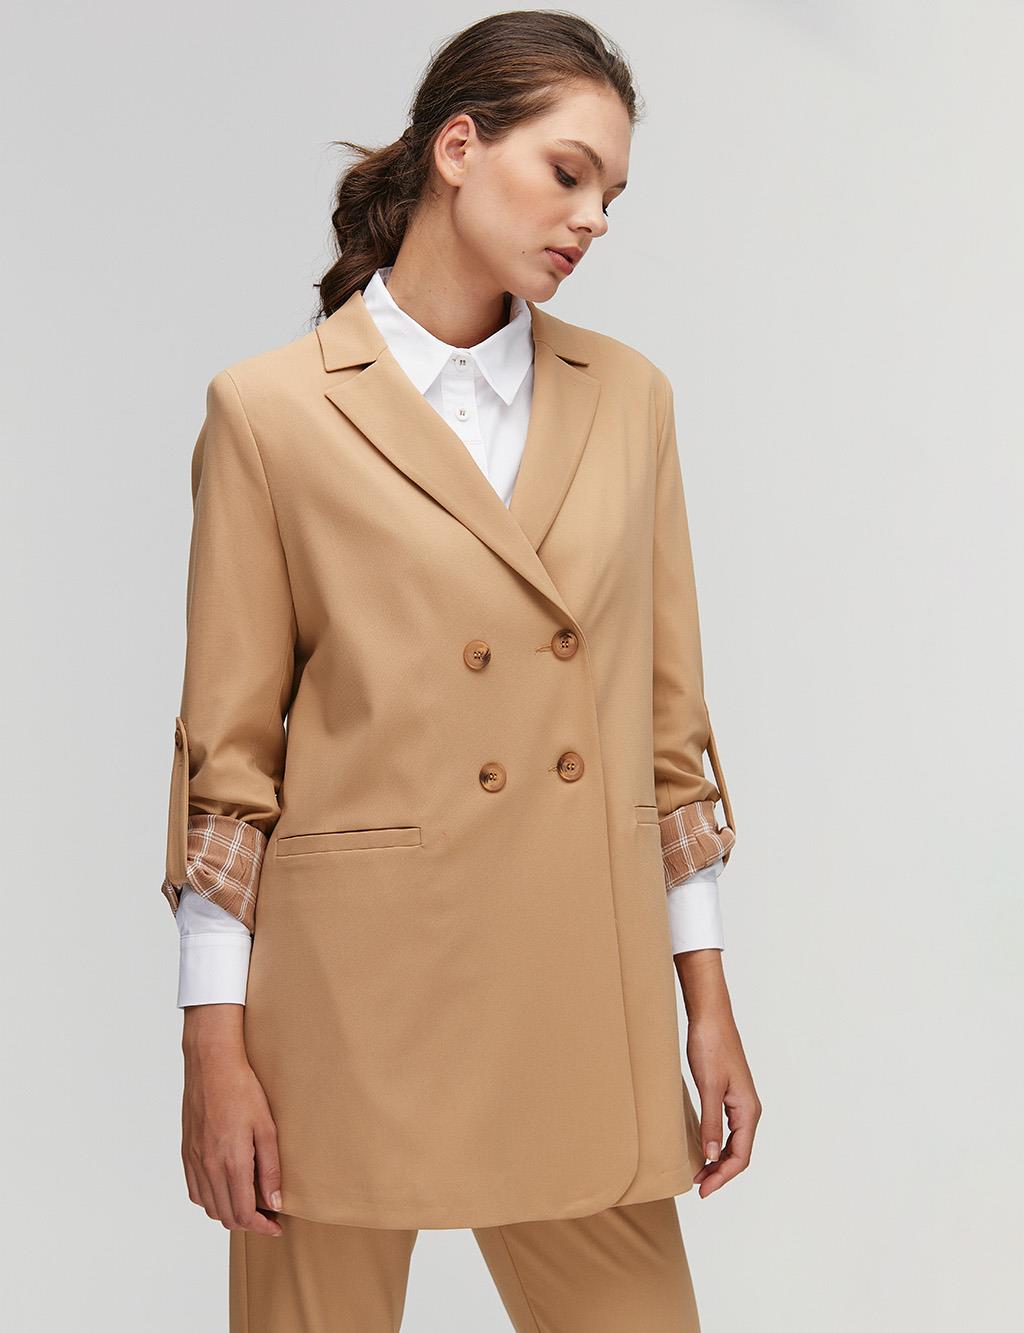 Collapsible Double Breasted Jacket Beige